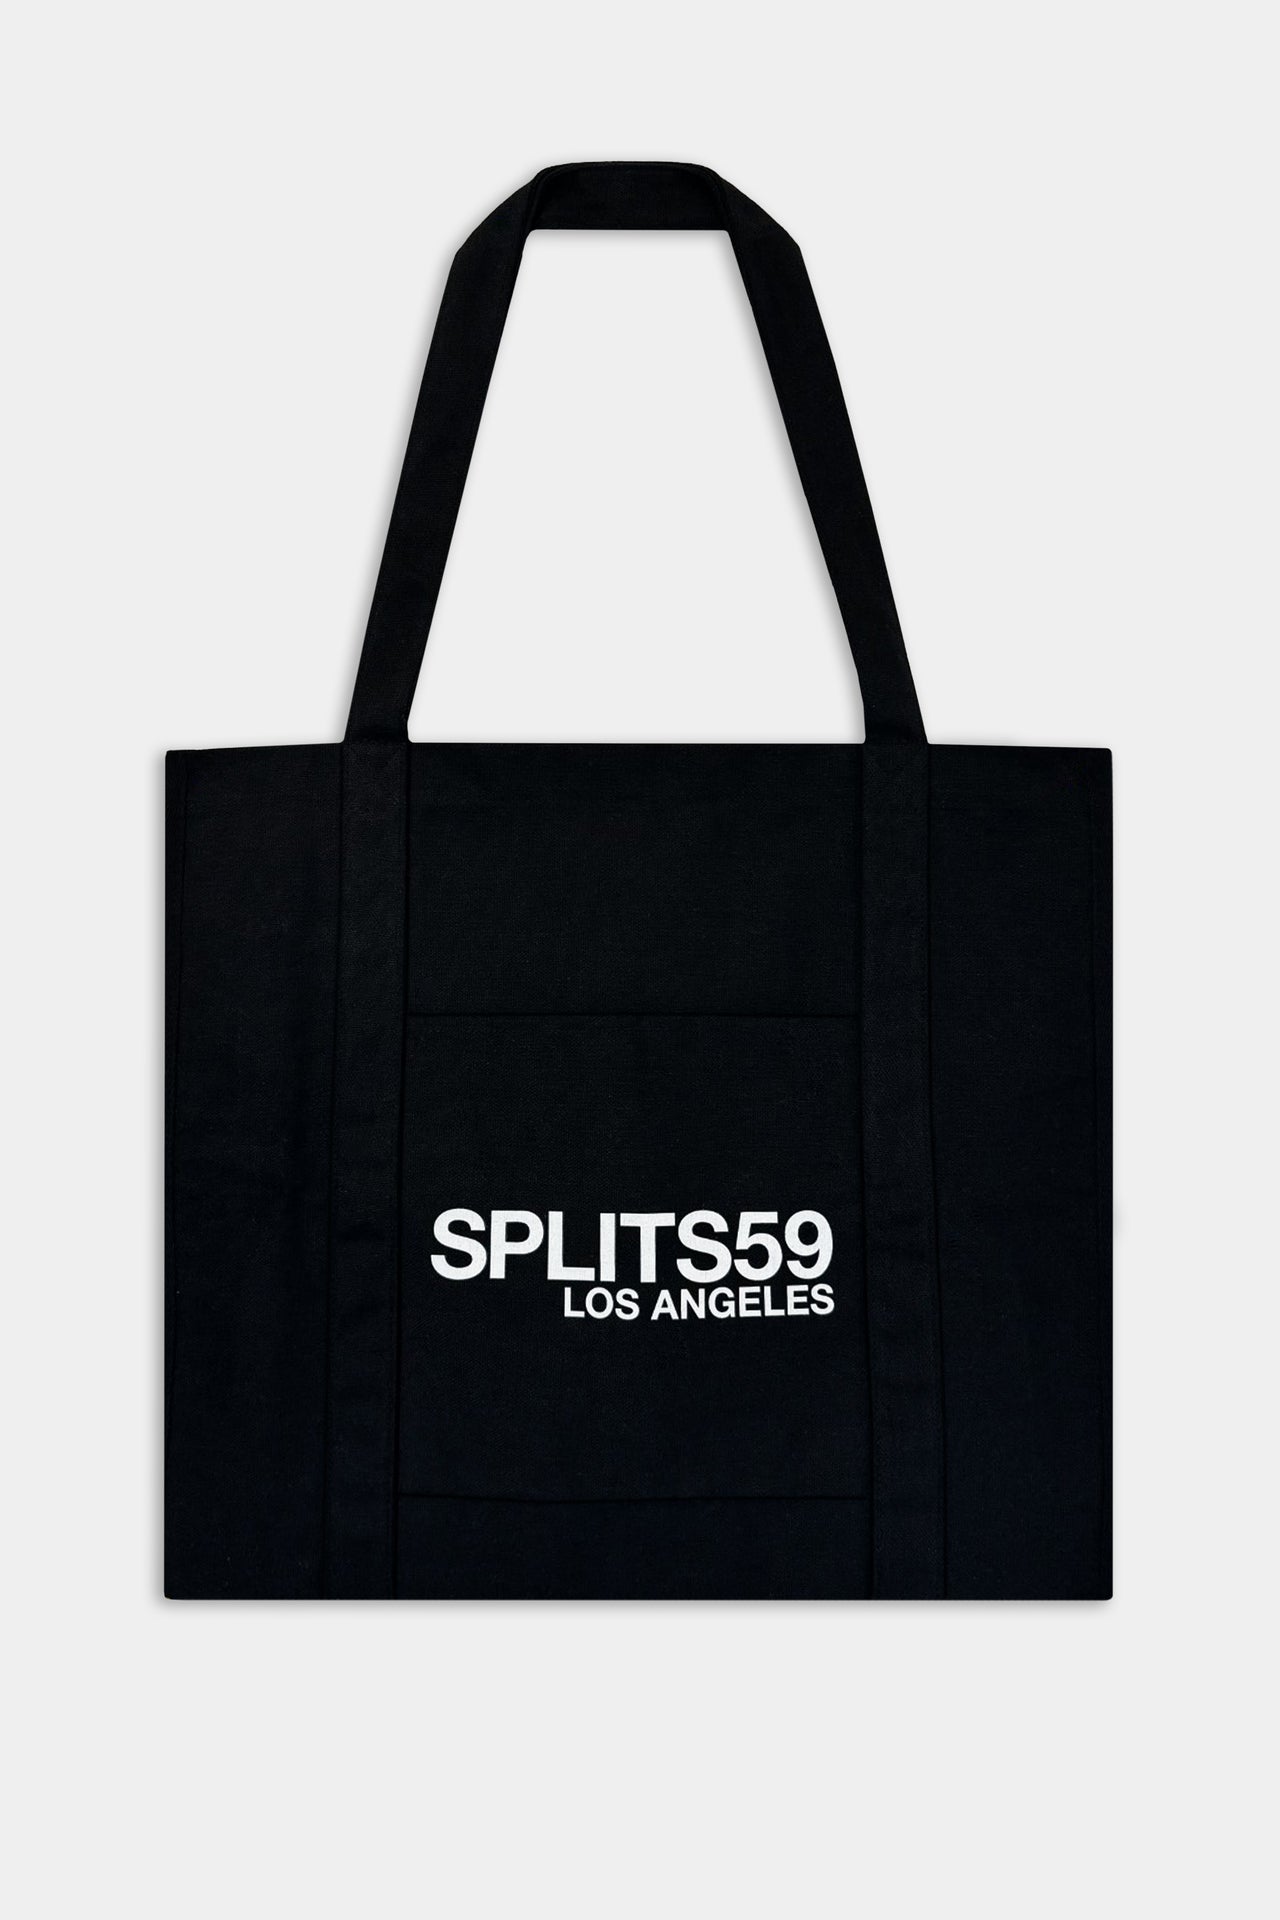 Front flat view of black tote bag with Splits59 Los Angeles white letter print